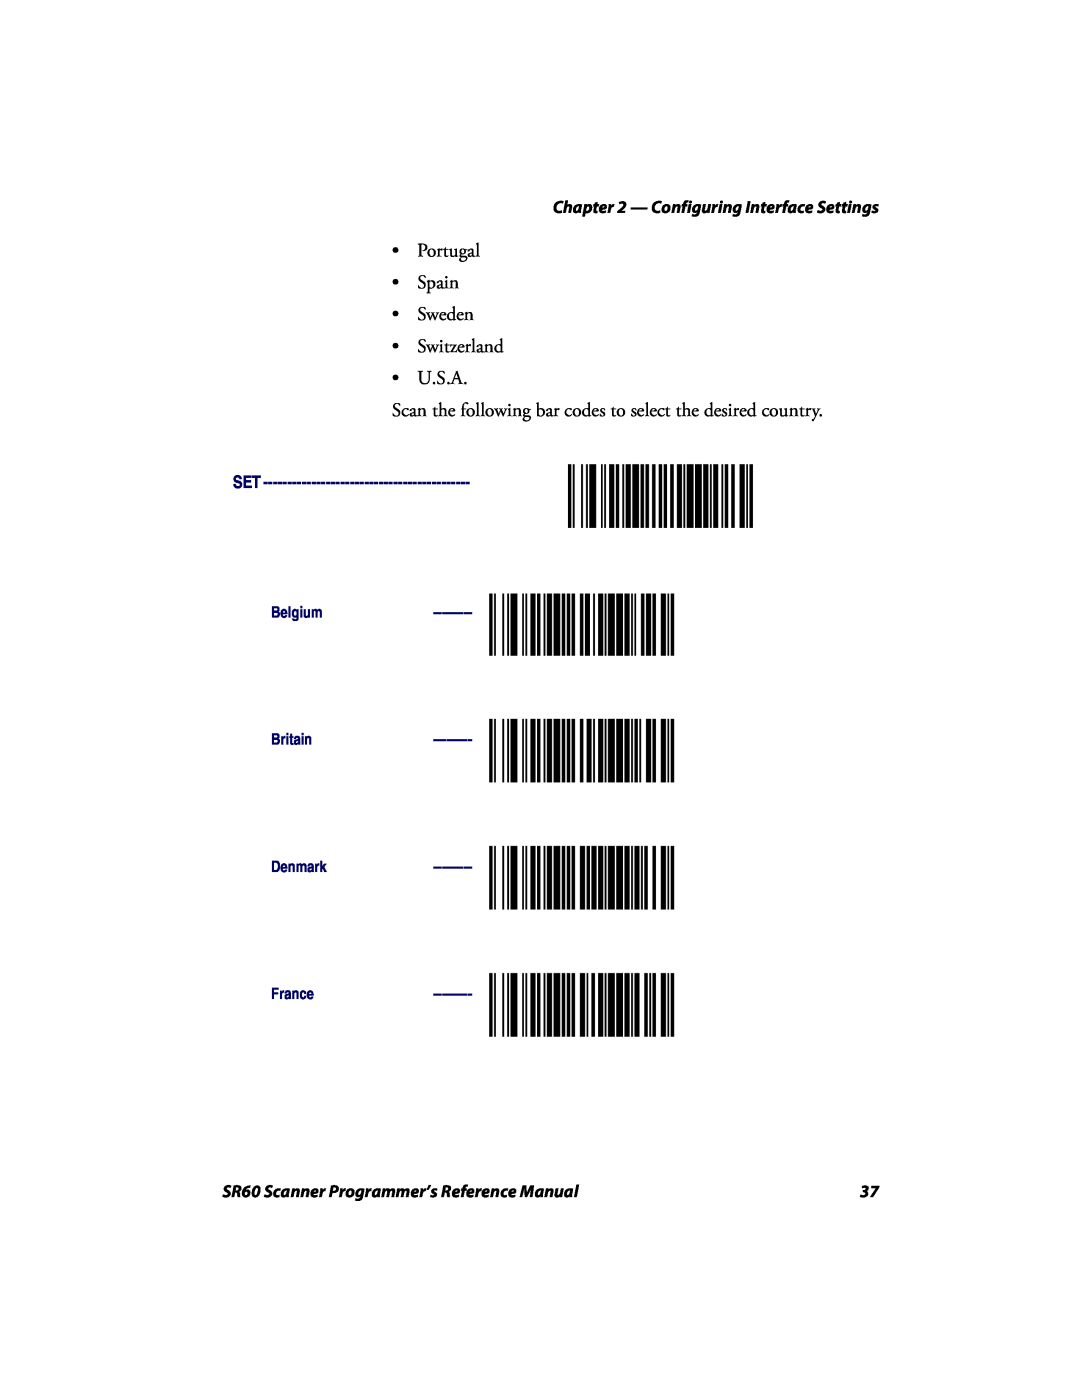 Intermec SR60 manual Portugal Spain Sweden Switzerland U.S.A, Scan the following bar codes to select the desired country 